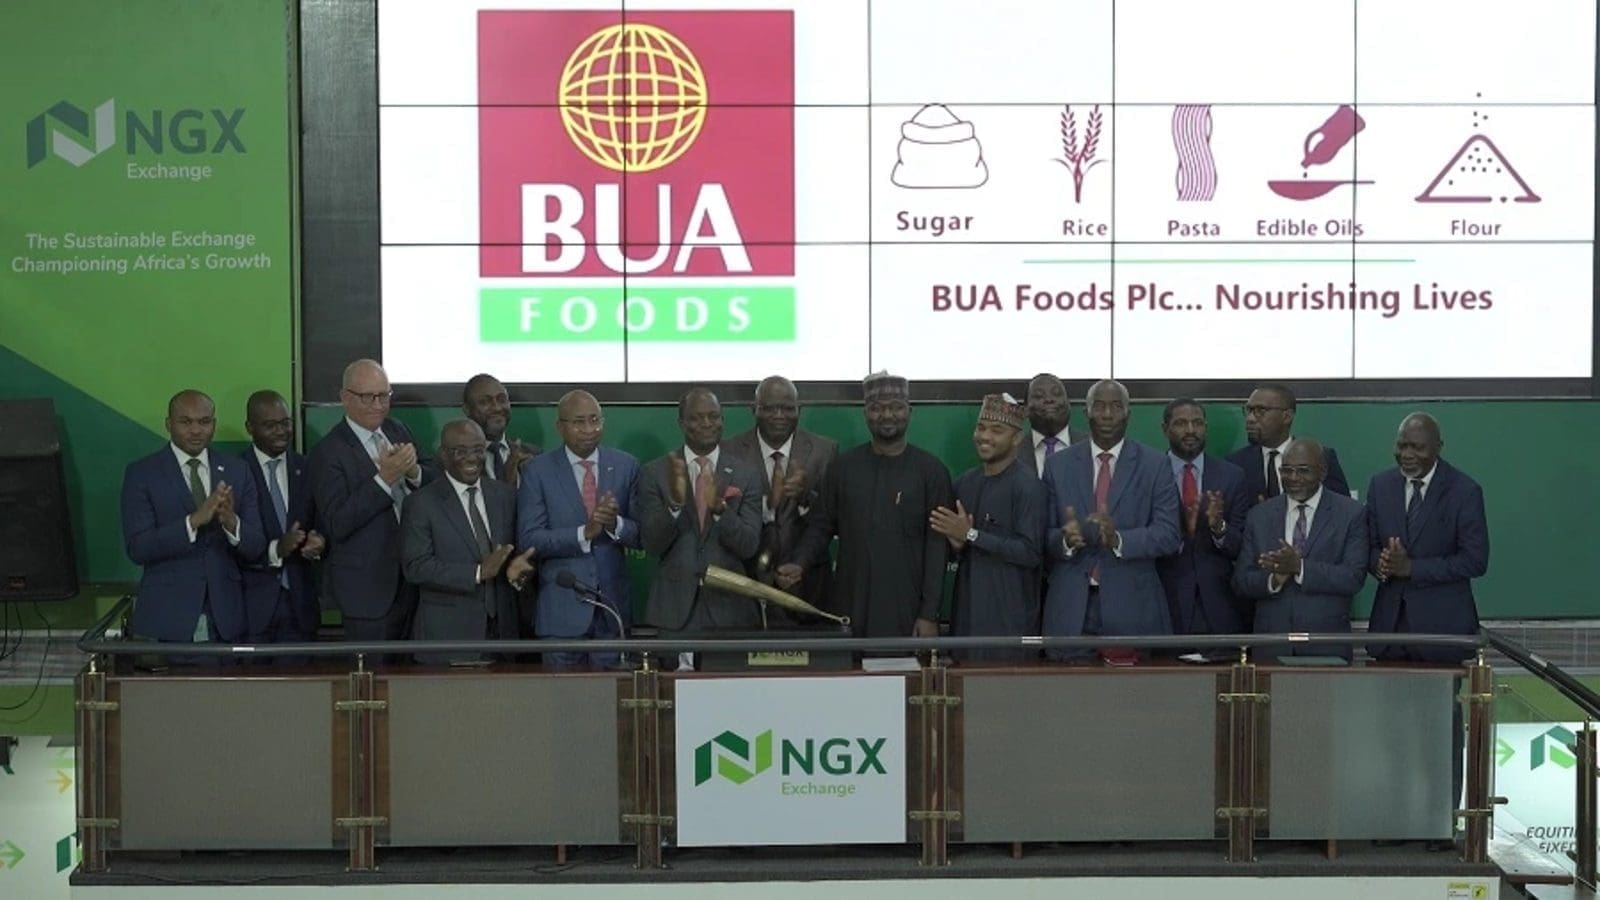 Nigerian FMCG Bua Foods posts 30% profit rise in FY2022 results driven by sales growth in sugar unit